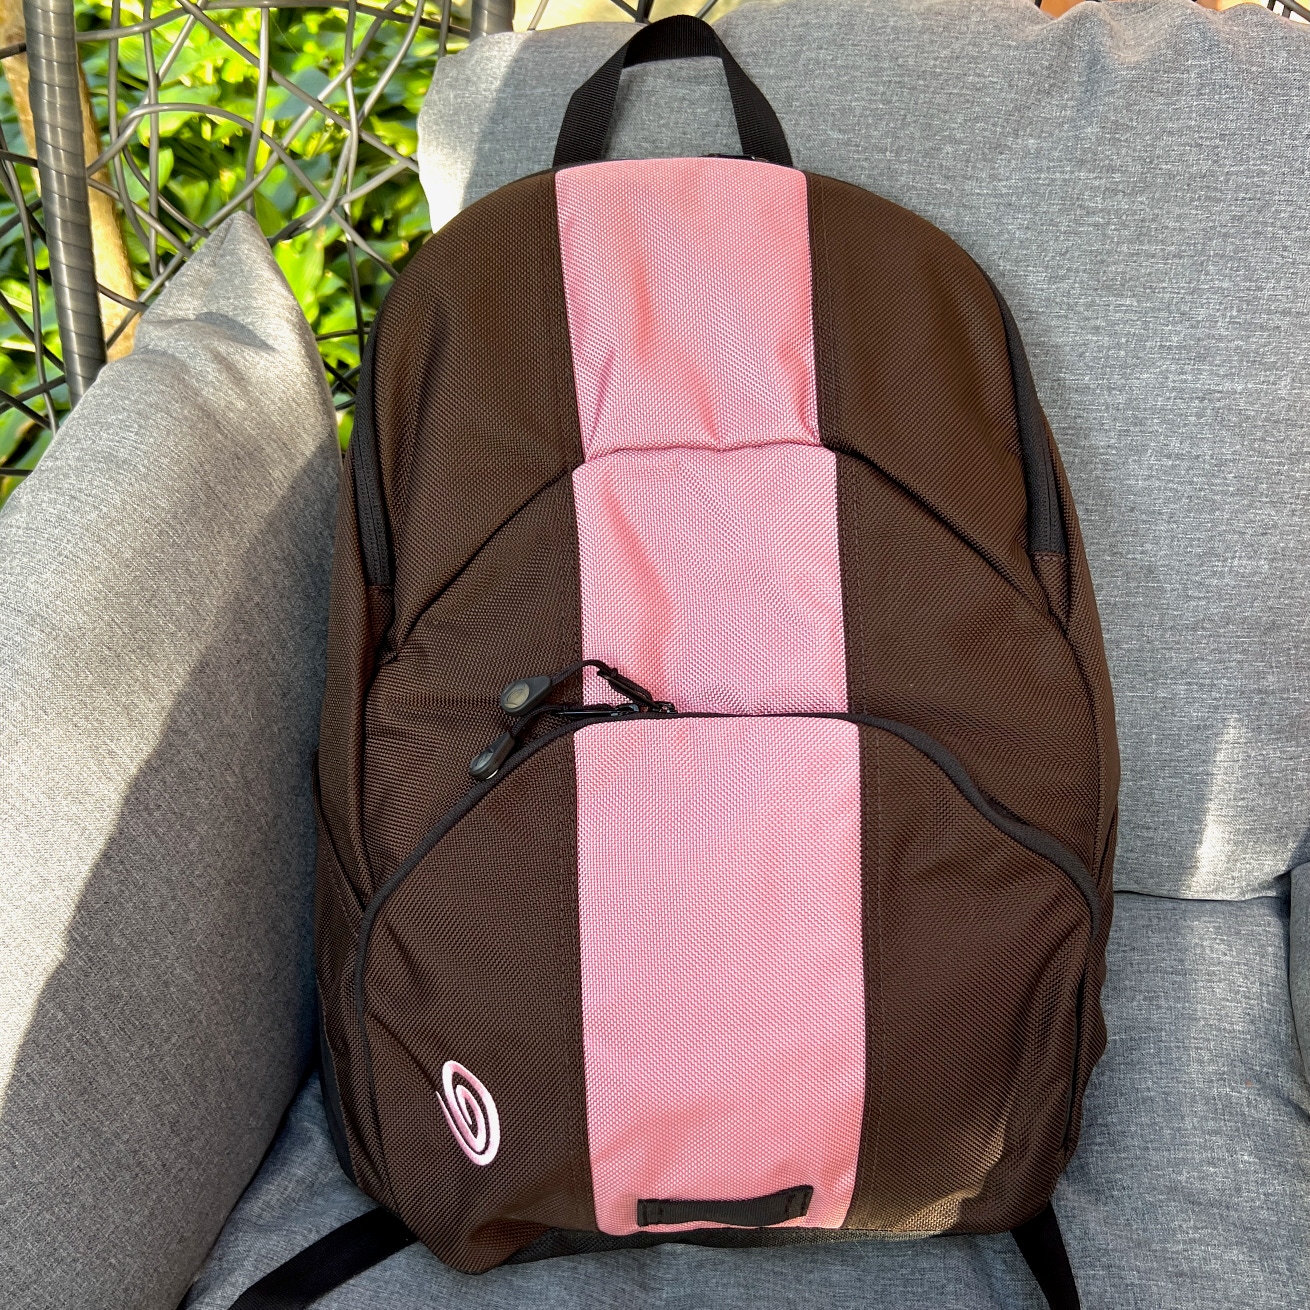 Timbuk2 Void Backpack Daypack w/ Padded Laptop Compartment Waterproof Brown Rose